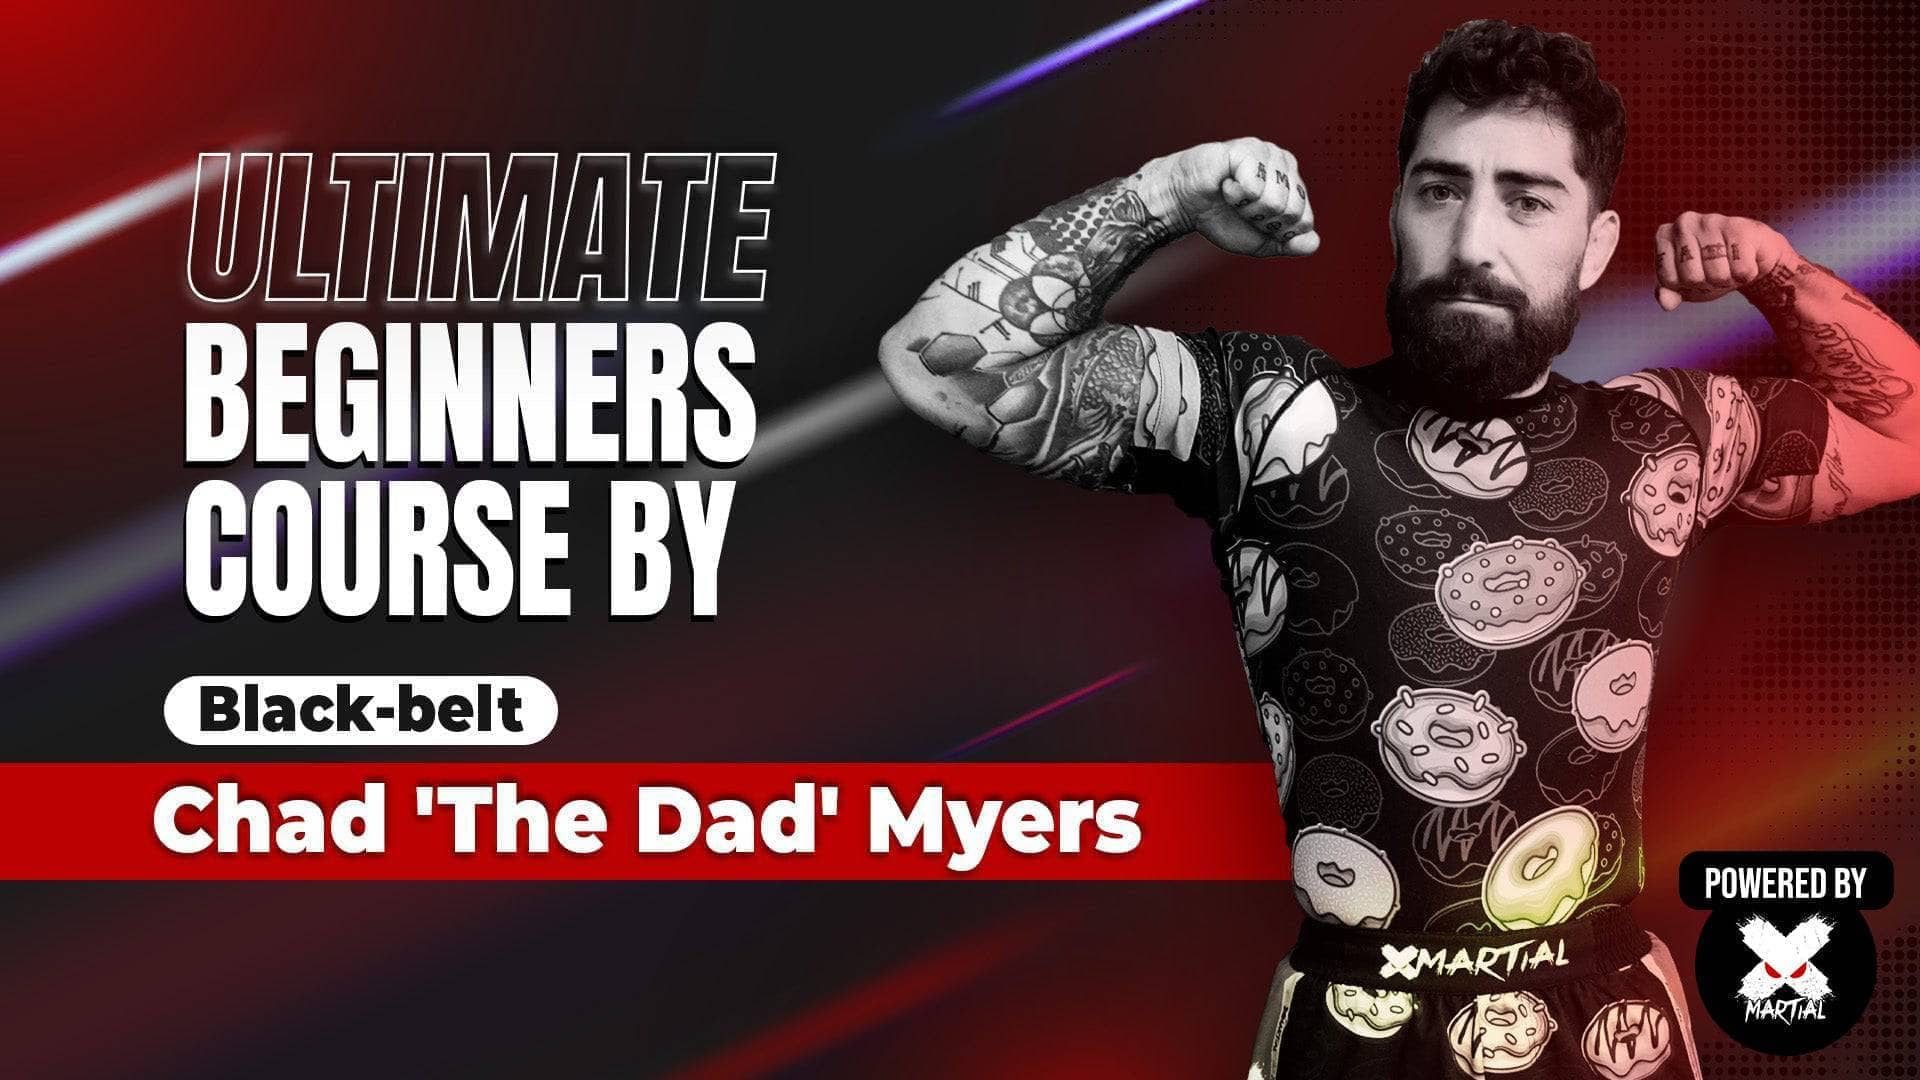 Champion's Bundle by Black-Belt Chad 'The Dad' Myers XMARTIAL